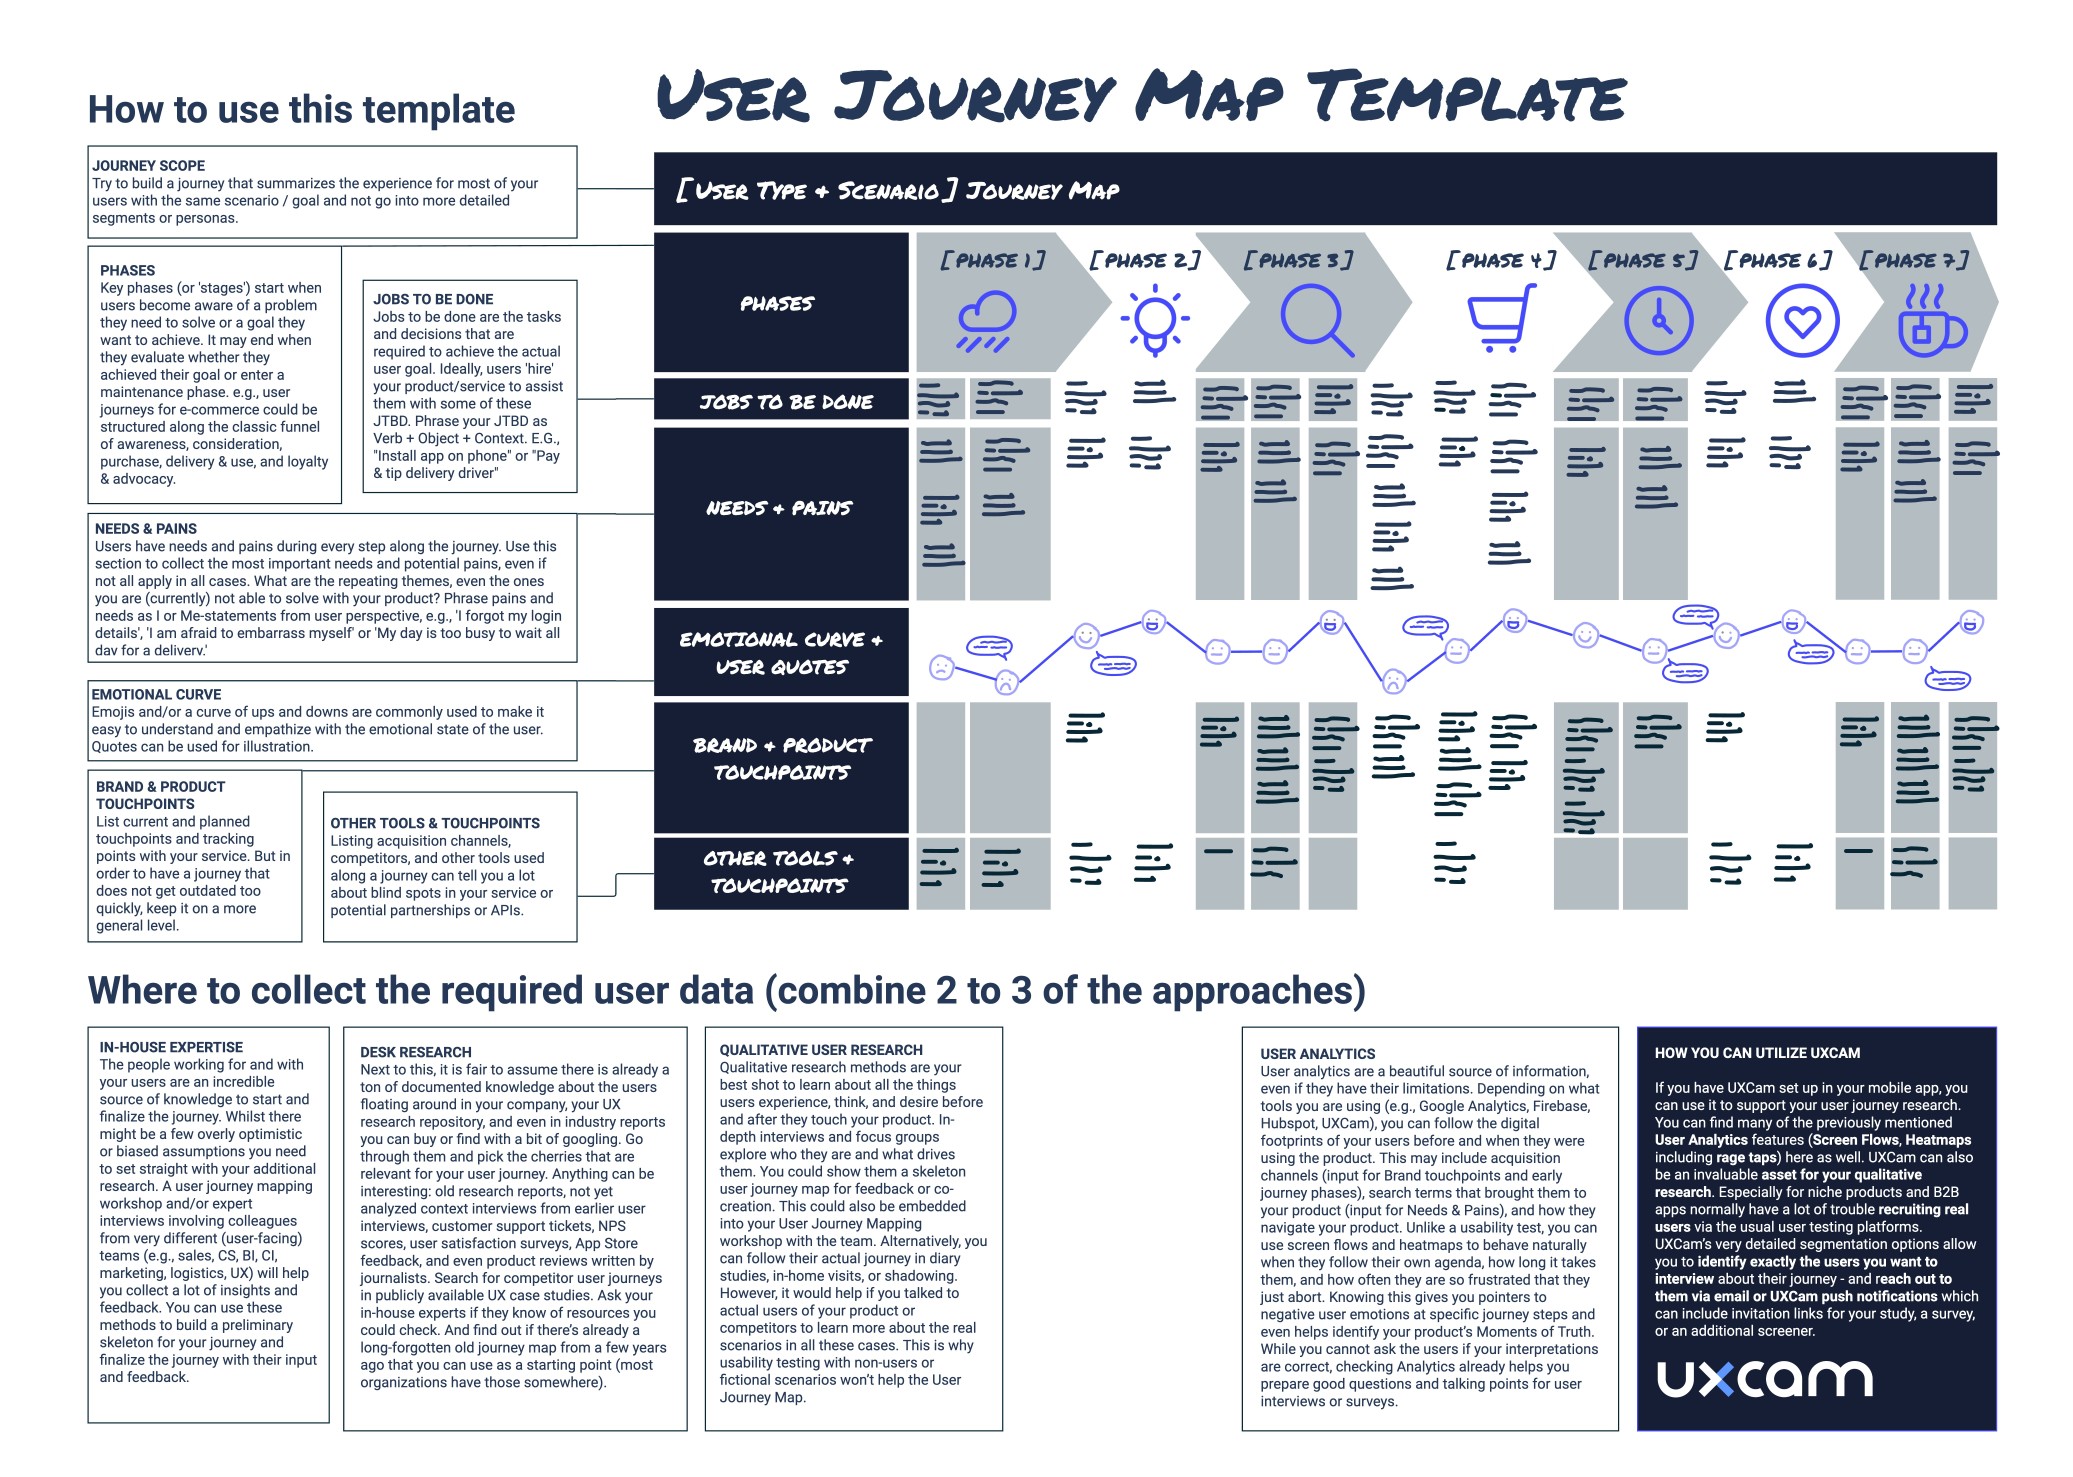 use journey map UX template